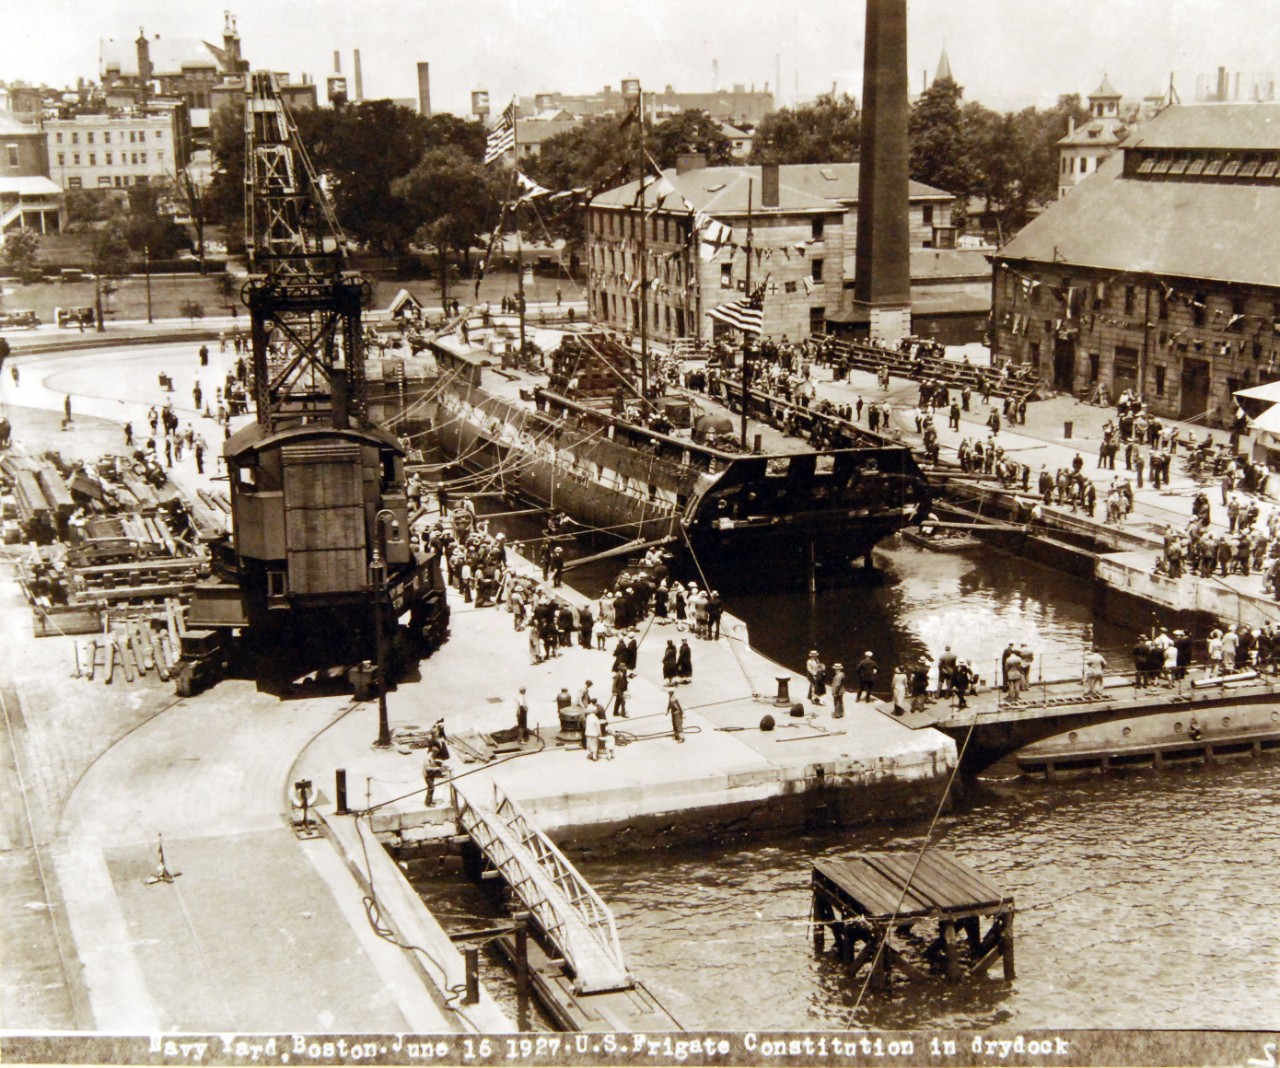 80-G-424919:  USS Constitution,  1927.   Constitution in drydock at Boston Navy Yard, Massachusetts.   Photograph, June 16, 1927.     Official U.S. Navy Photograph, now in the collections of the National Archives.   (2017/08/01).  